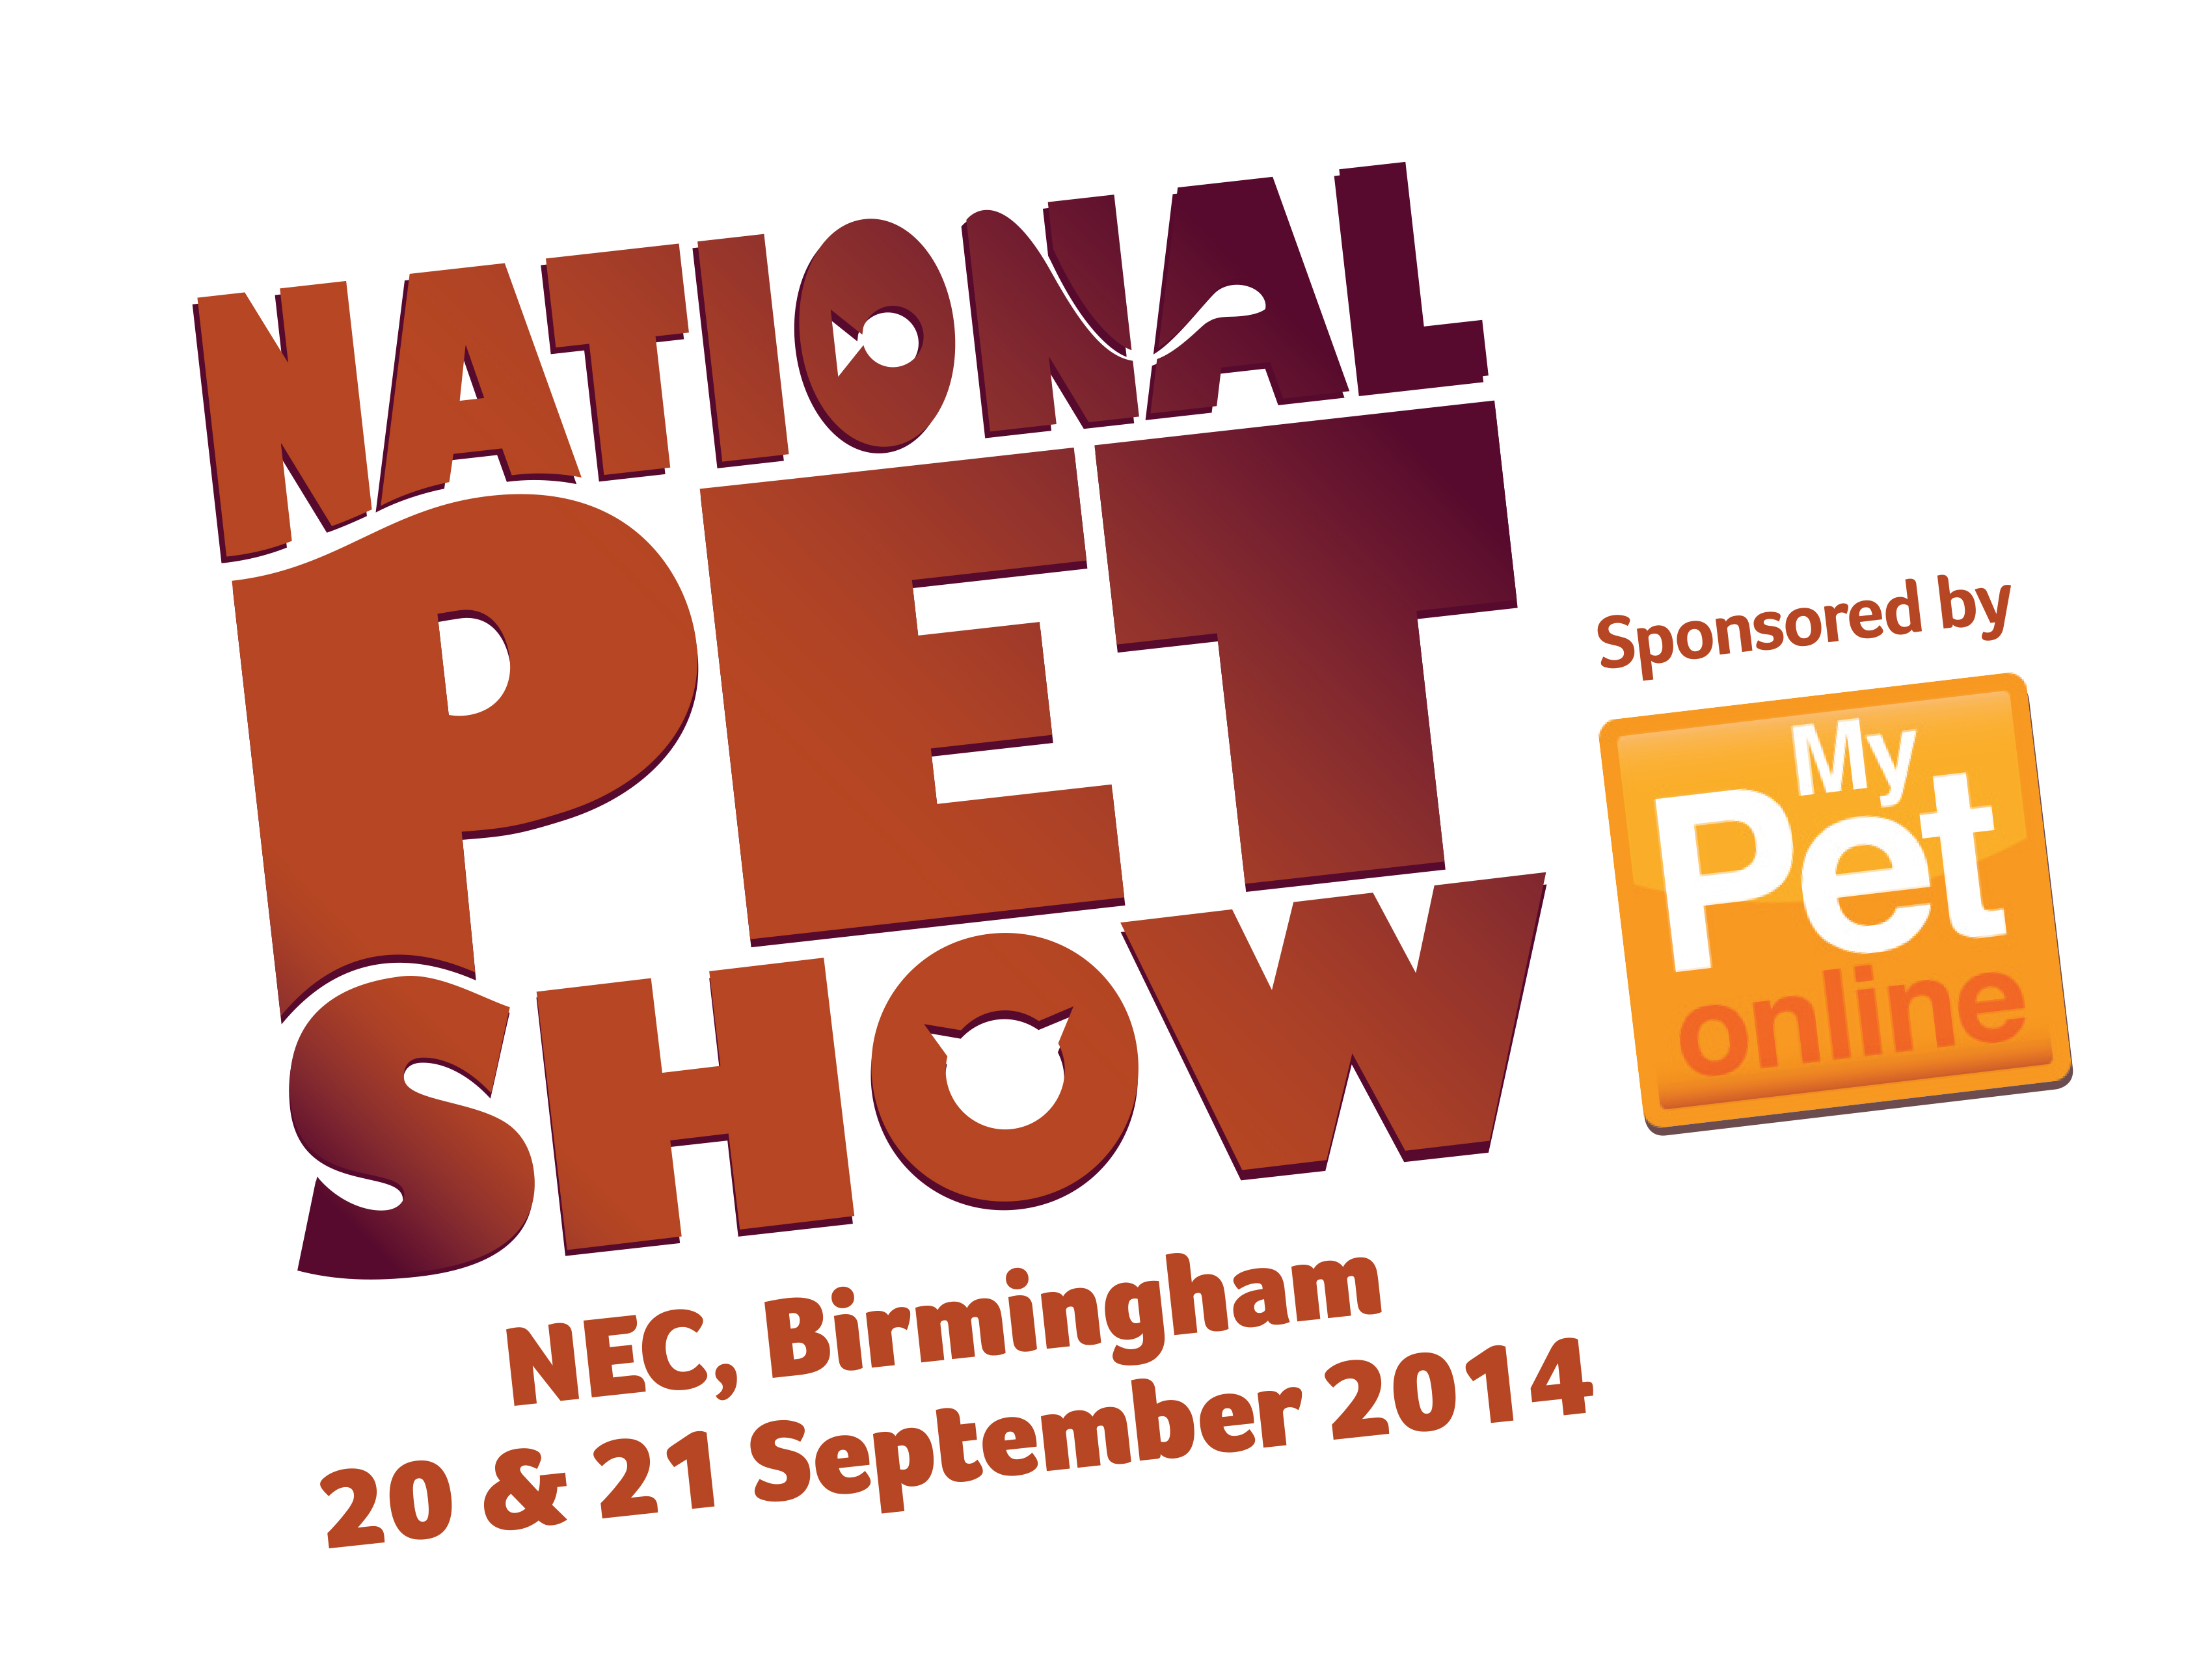 The National Pet Show 2014